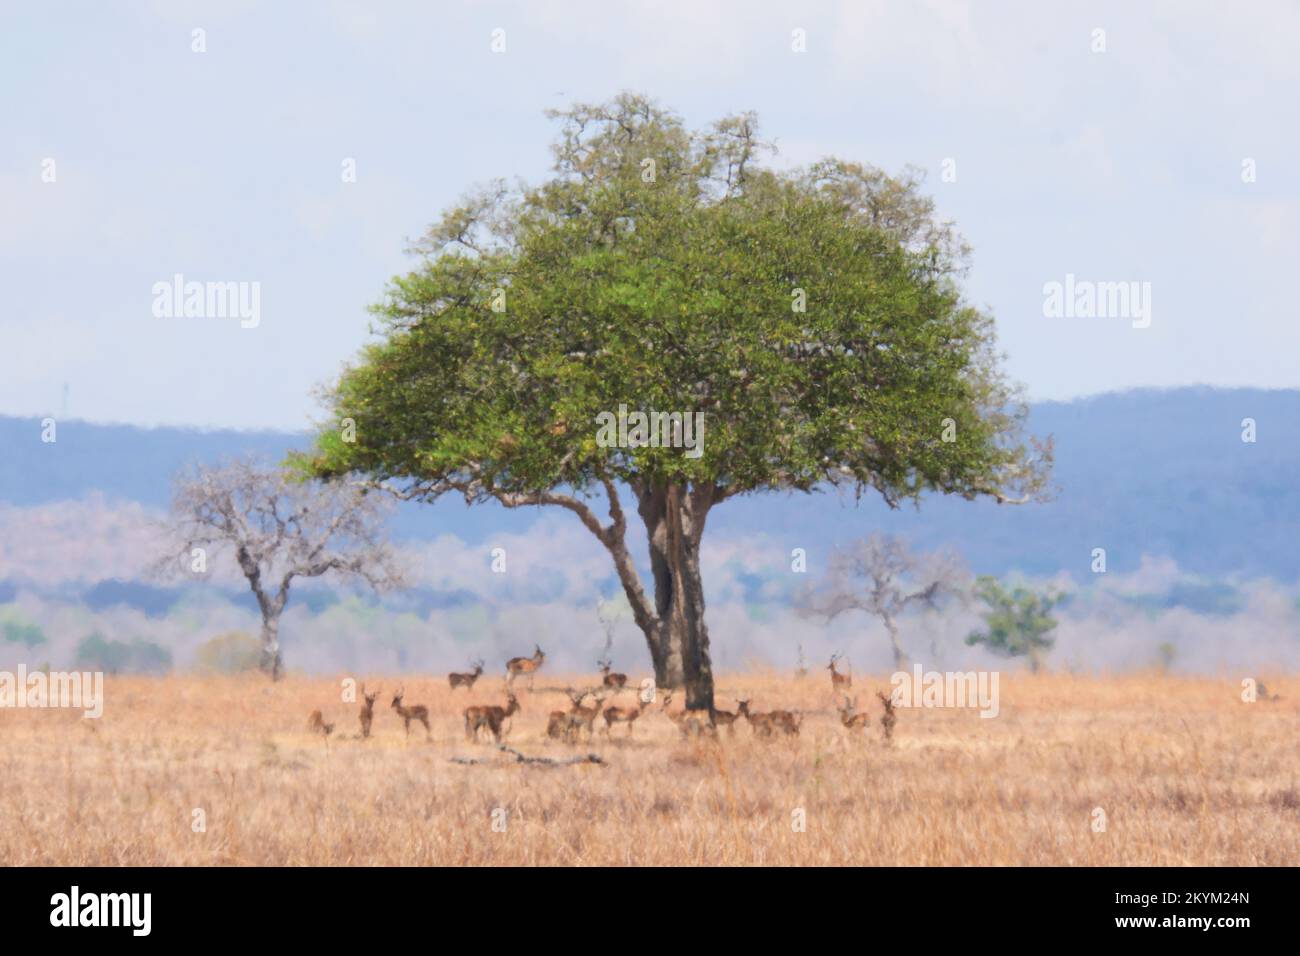 Impala hide from the sun under the shade of a tree, seen through a shimmering heat haze in the midday heat of  Mikumi National park in dry season Stock Photo